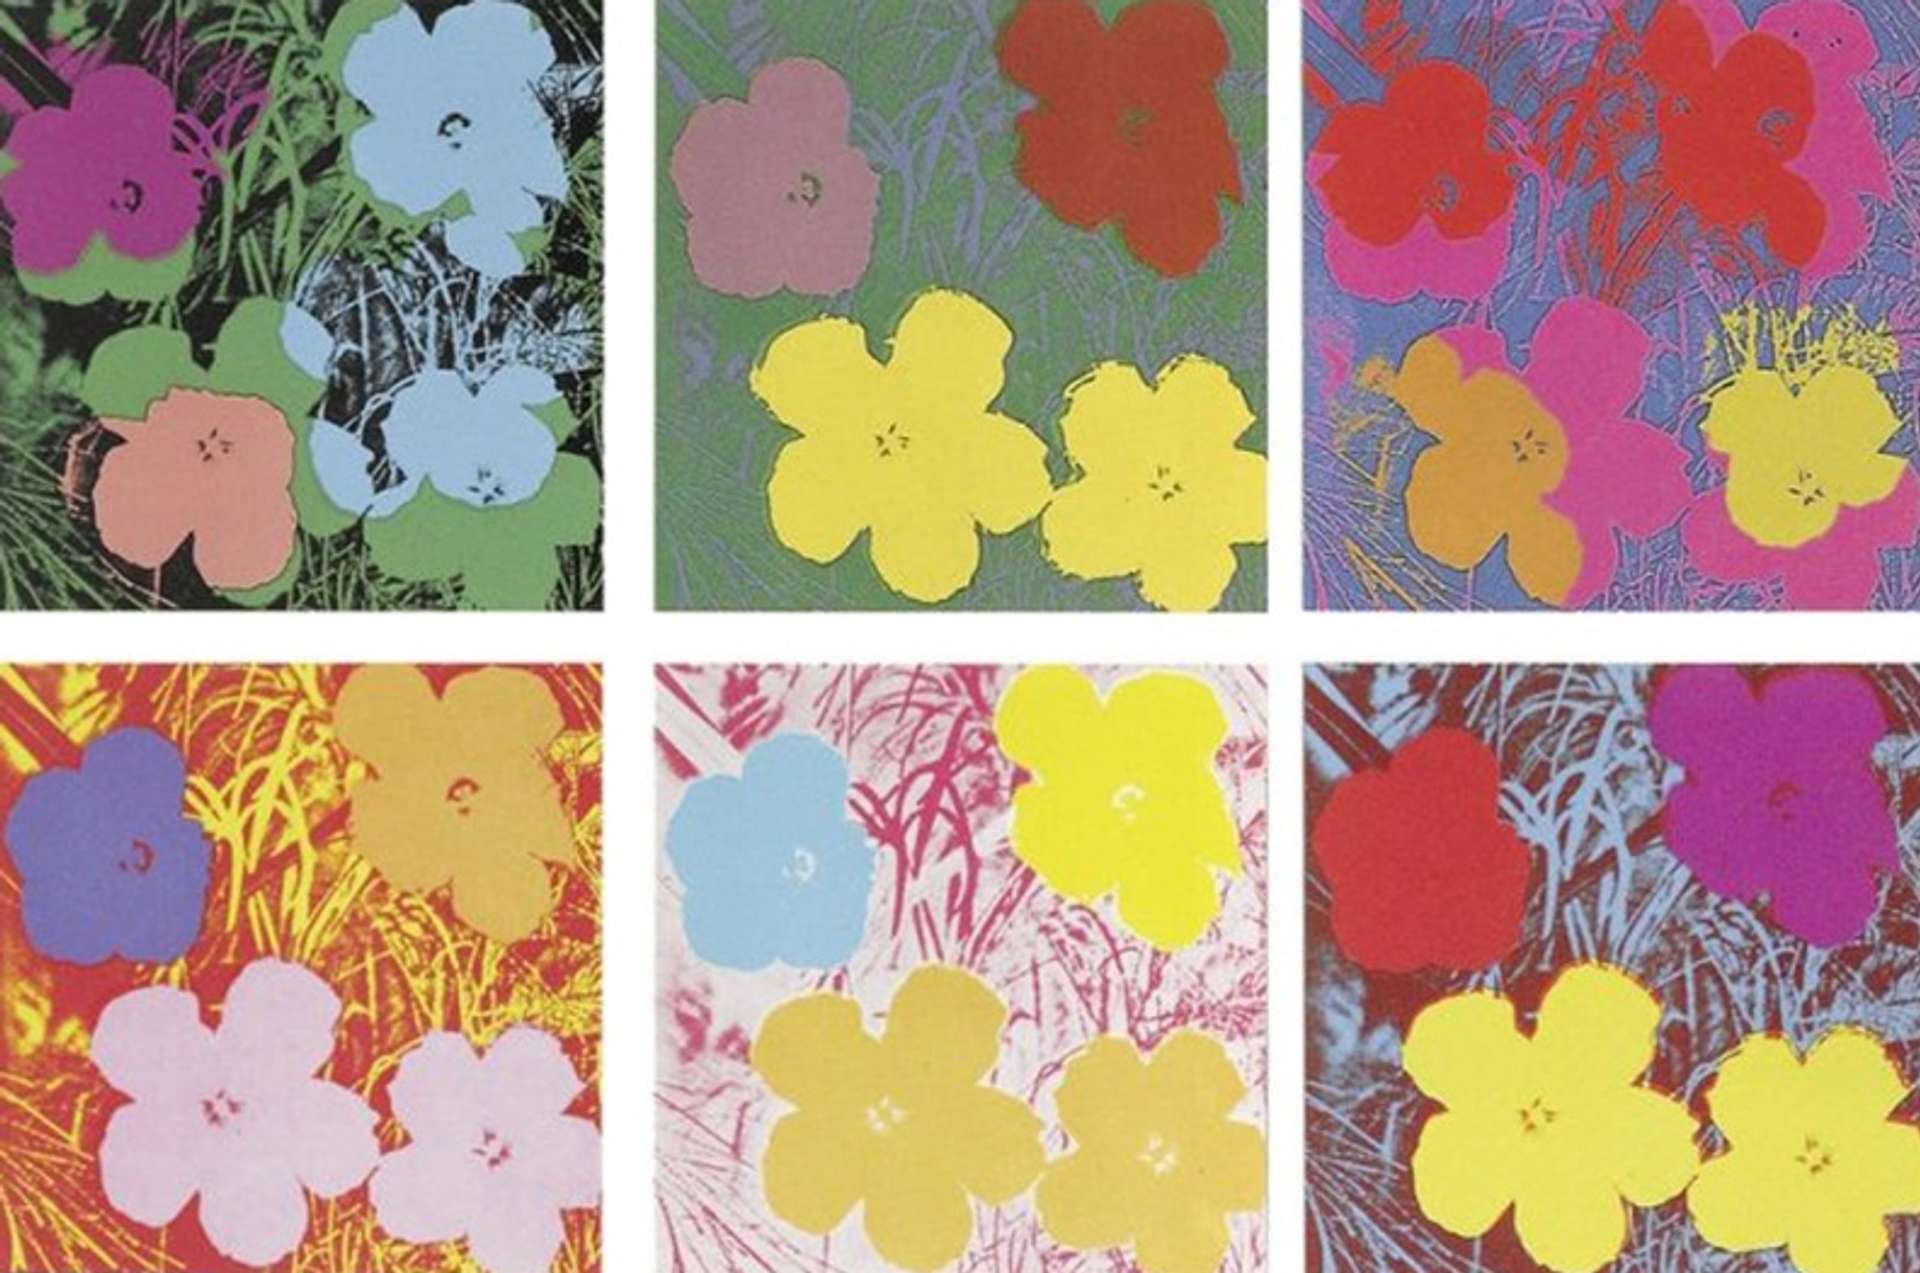 Flowers Series by Andy Warhol